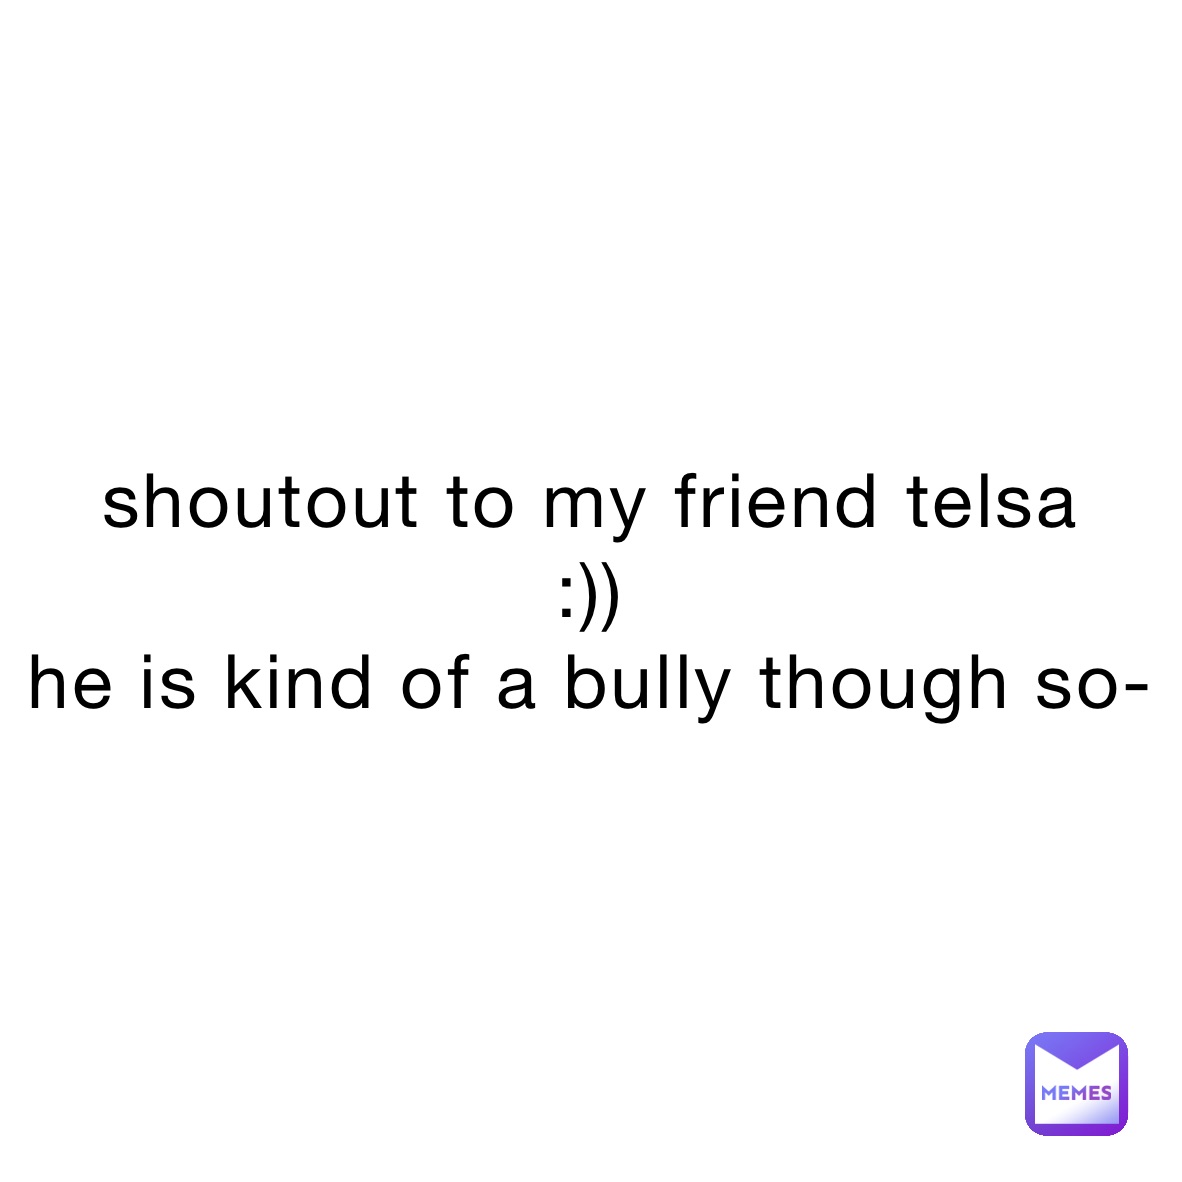 shoutout to my friend telsa
:))
he is kind of a bully though so-